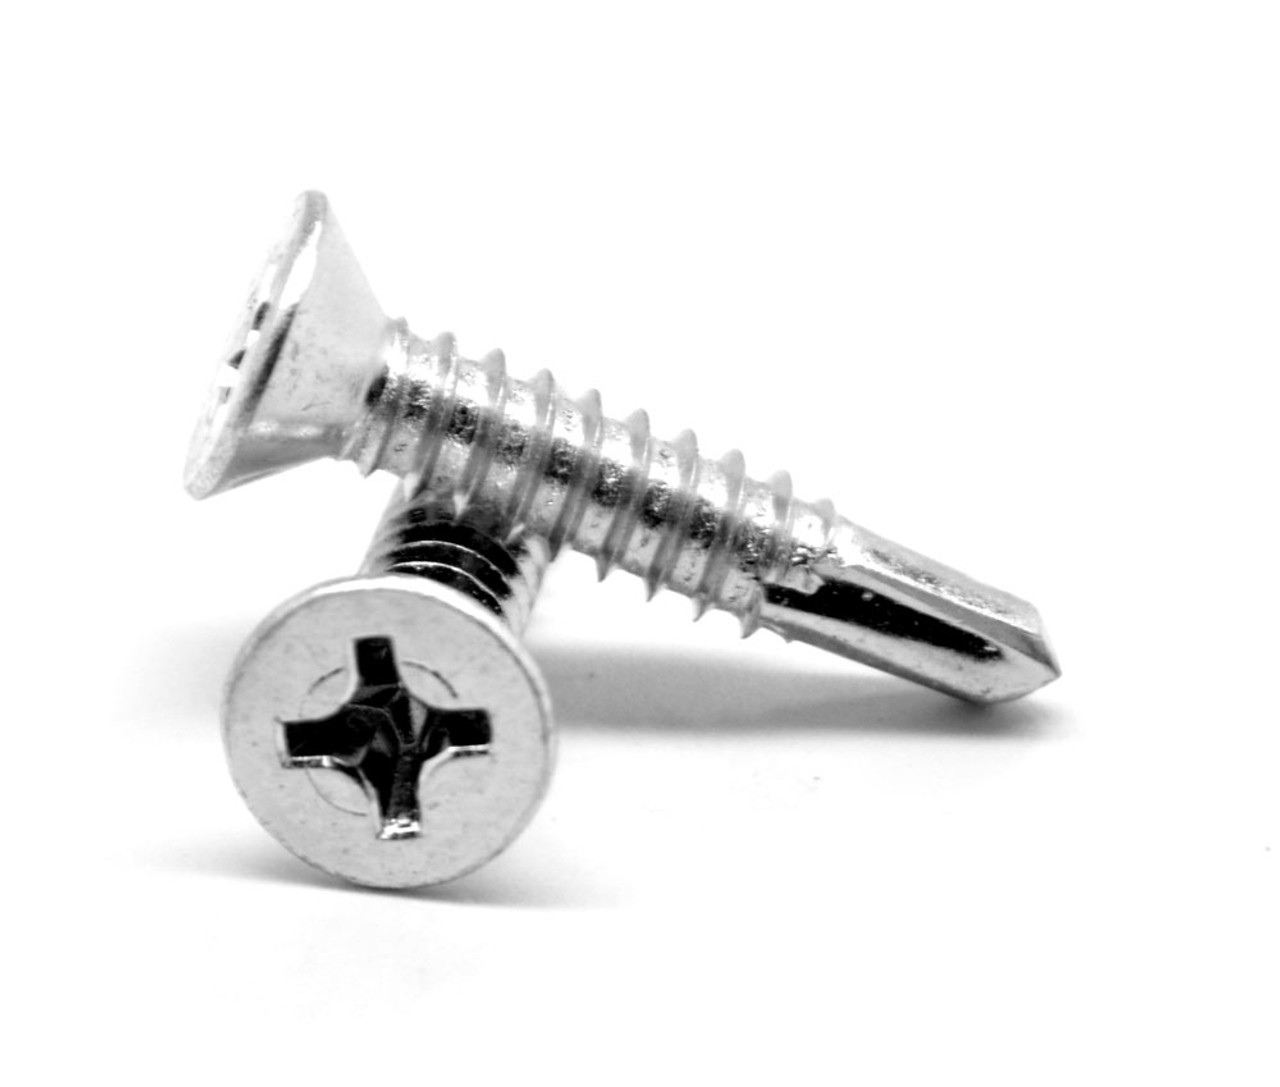 #10-16 x 1/2" (FT) Self Drilling Screws Phillips Flat Head #3 Point Stainless Steel 410